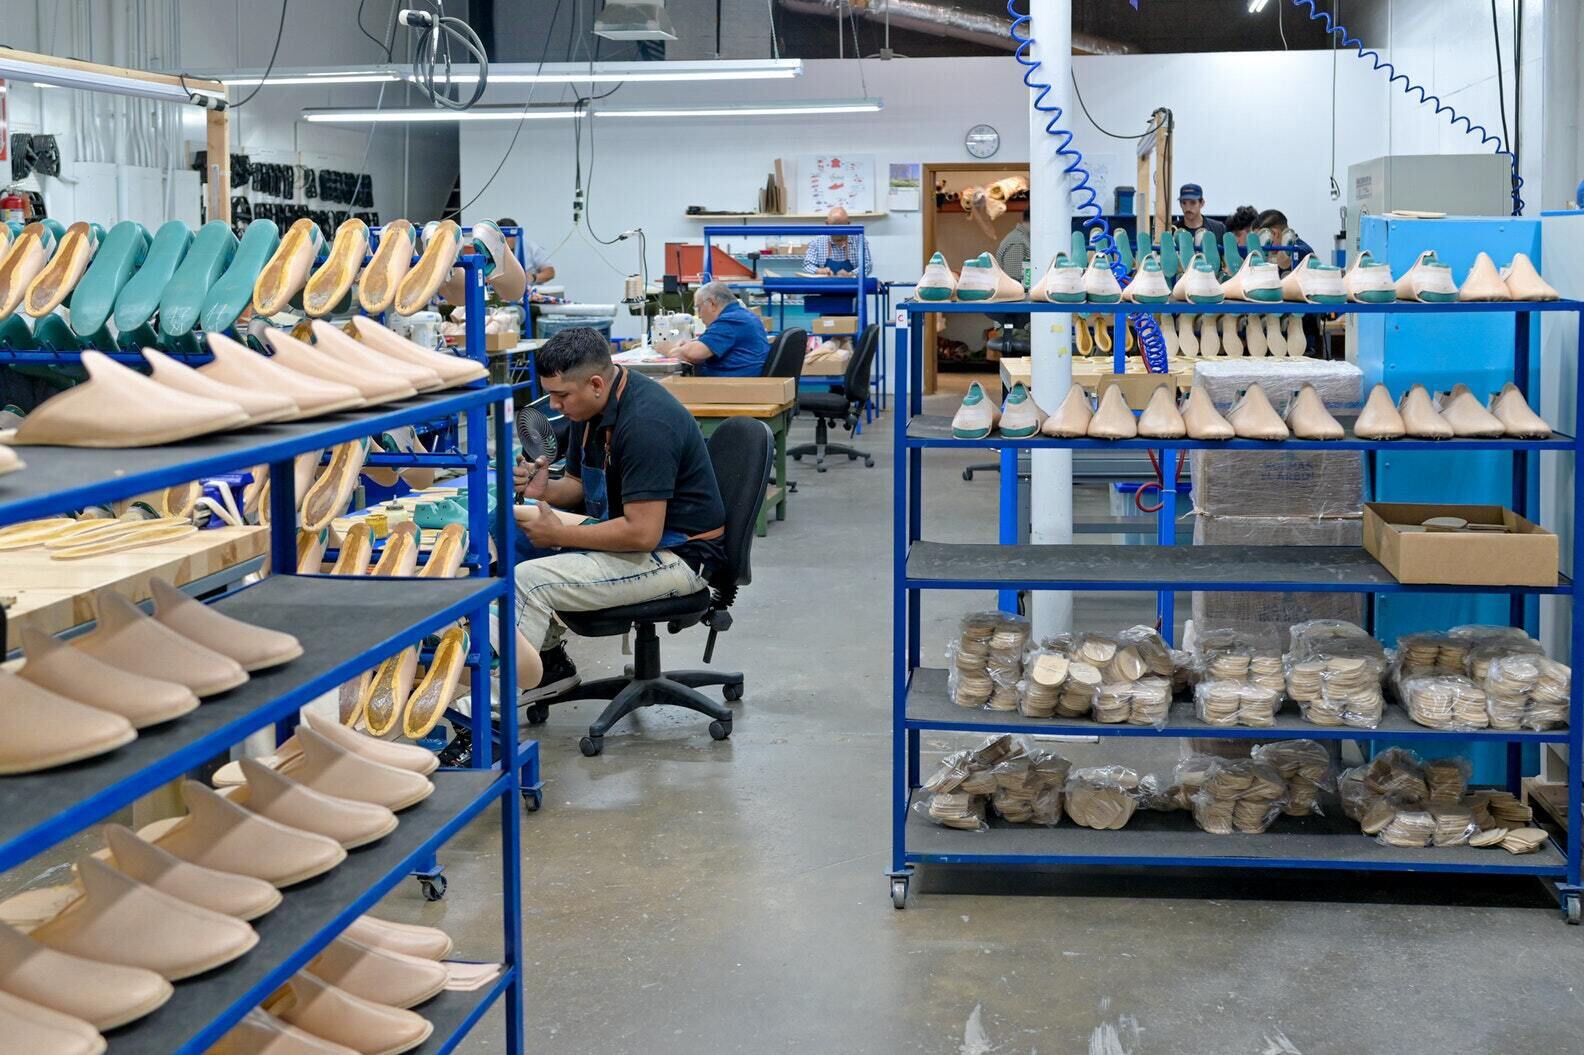 Sabah opened a 12-person factory in El Paso in April, marking the first time the shoemaking...